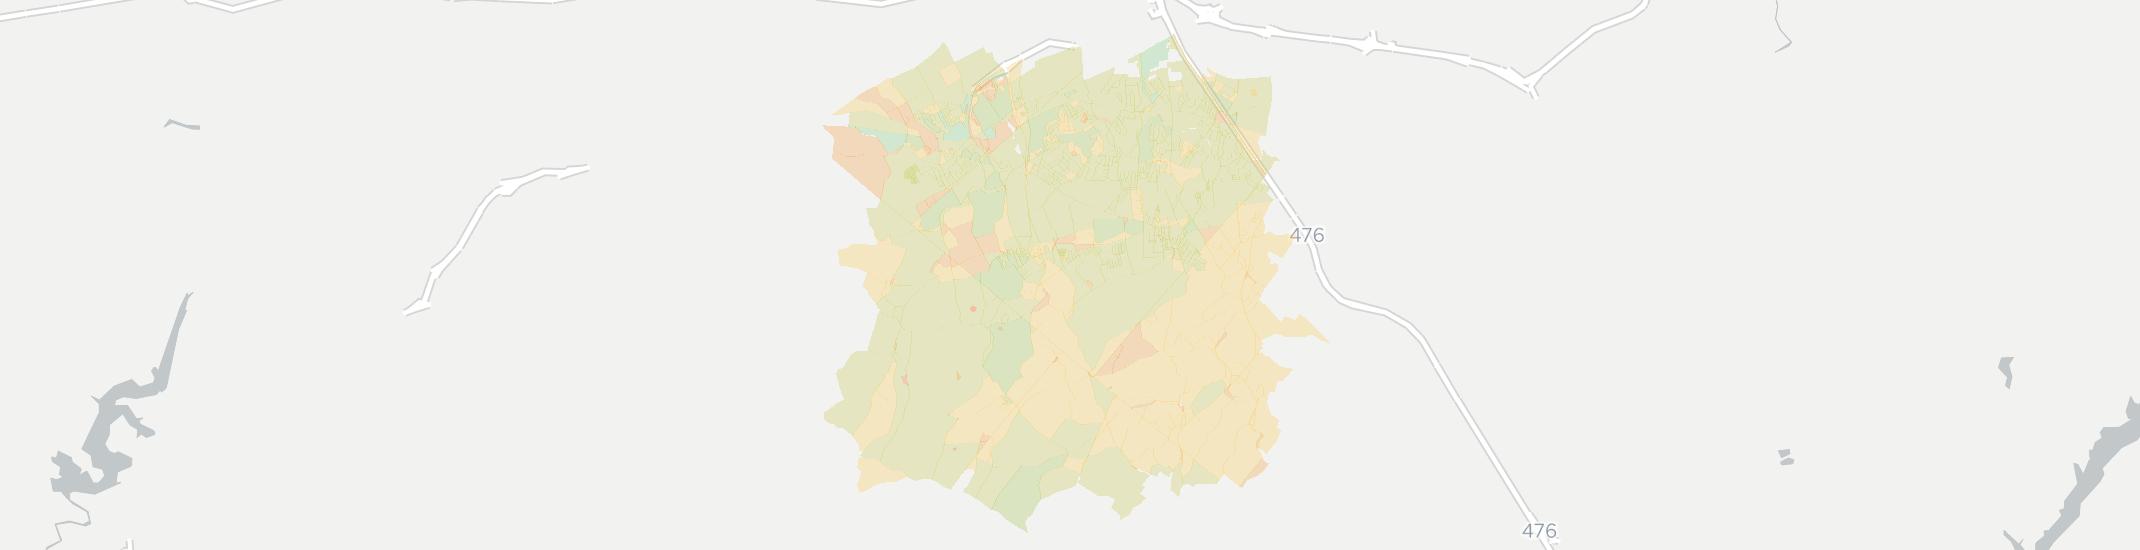 Macungie Internet Competition Map. Click for interactive map